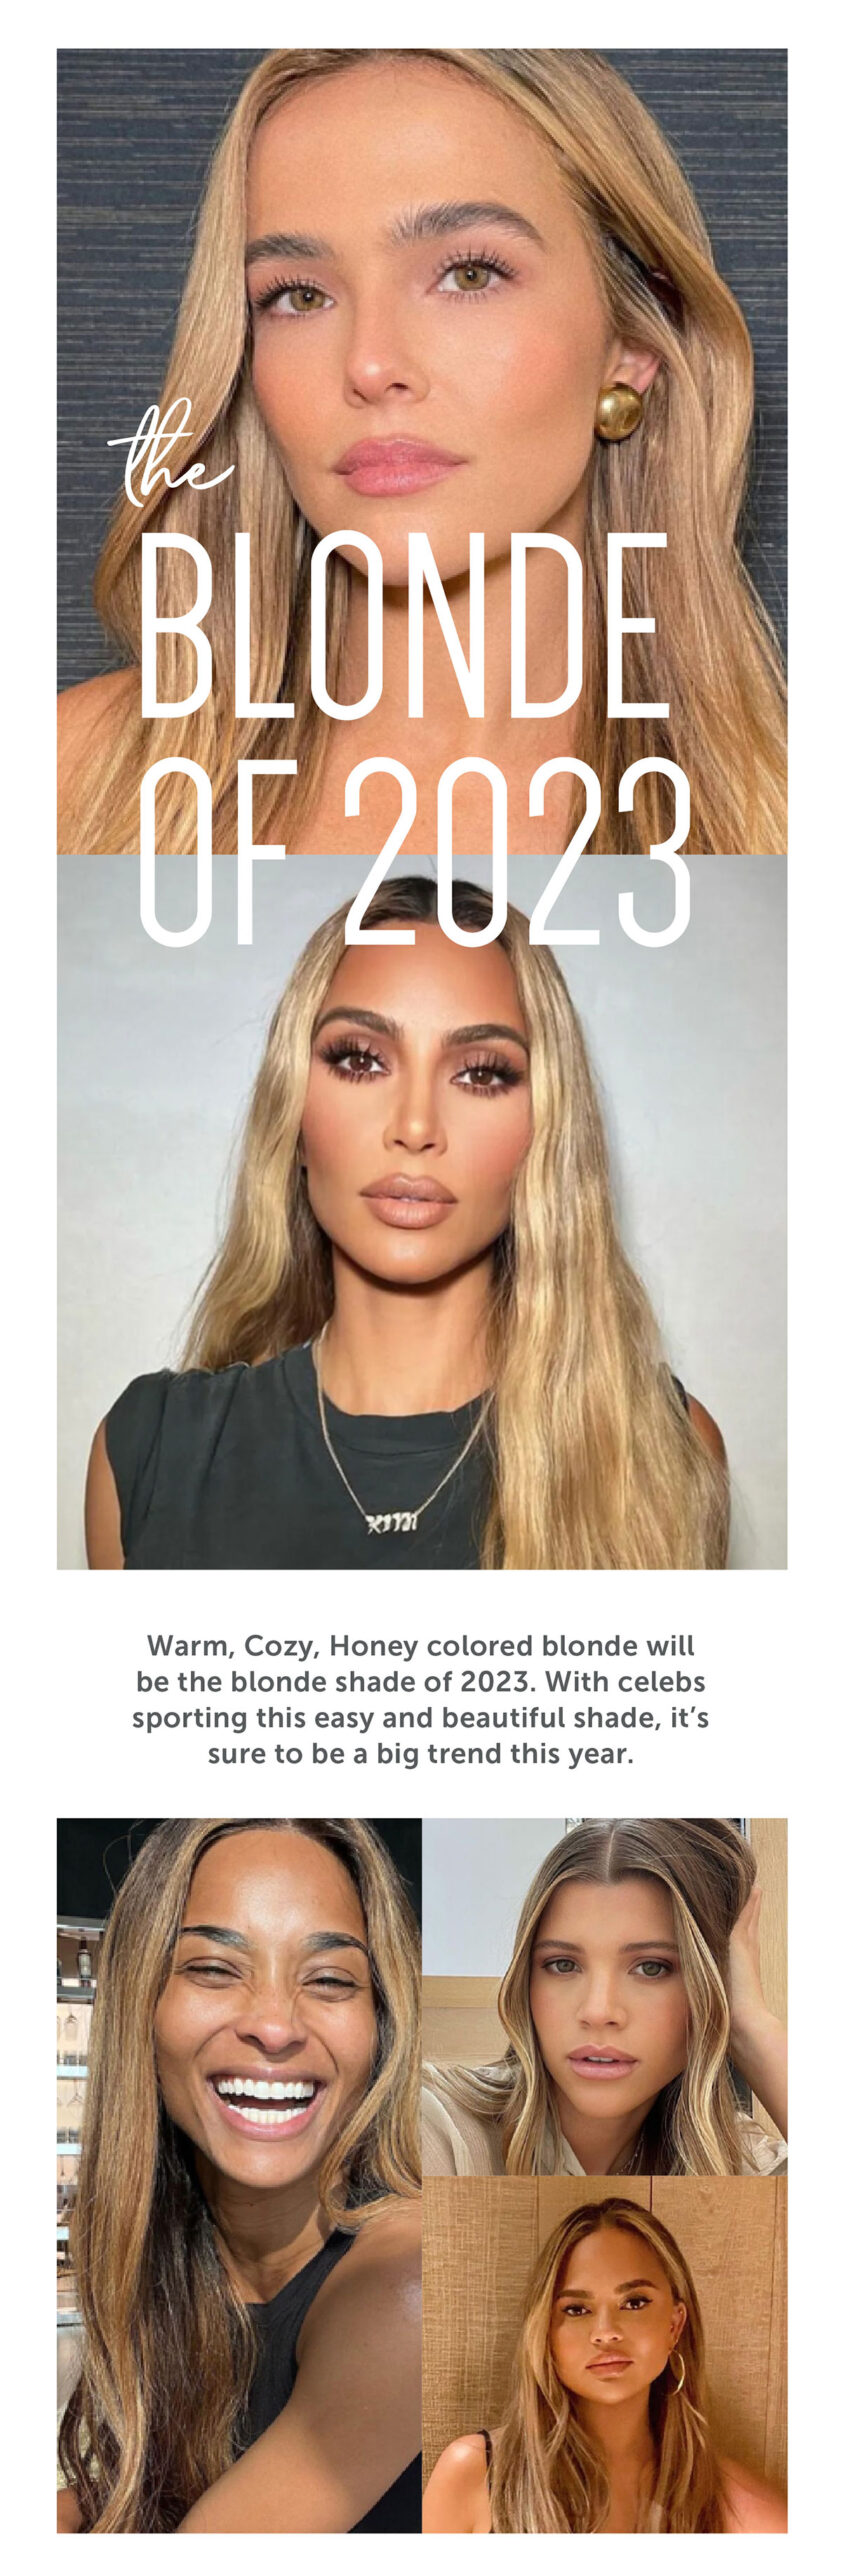 The Blonde of 2023 Warm, Cozy, Honey colored blonde will be the blonde shade of 2023. With celebs sporting this easy and beautiful shade, it’s sure to be a big trend this year.